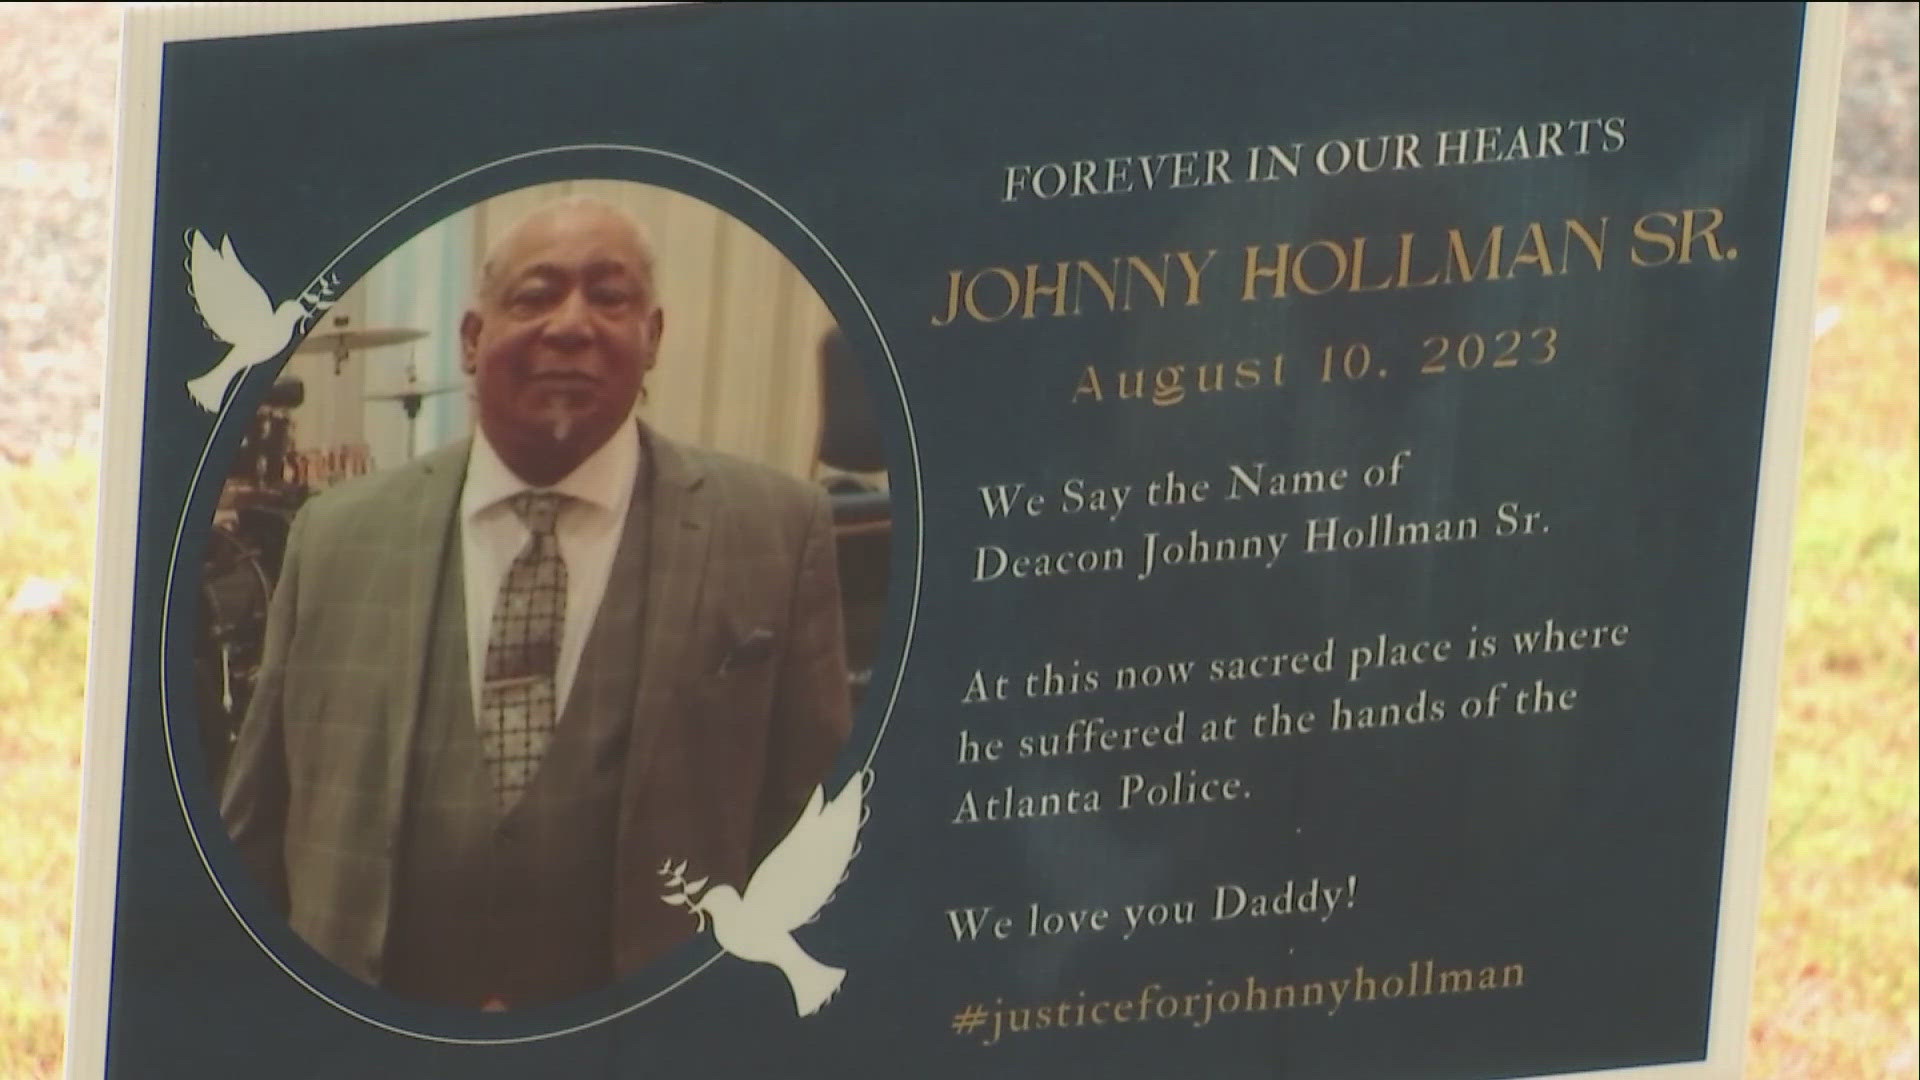 Johnny Hollman died after being tased by police in 2023.